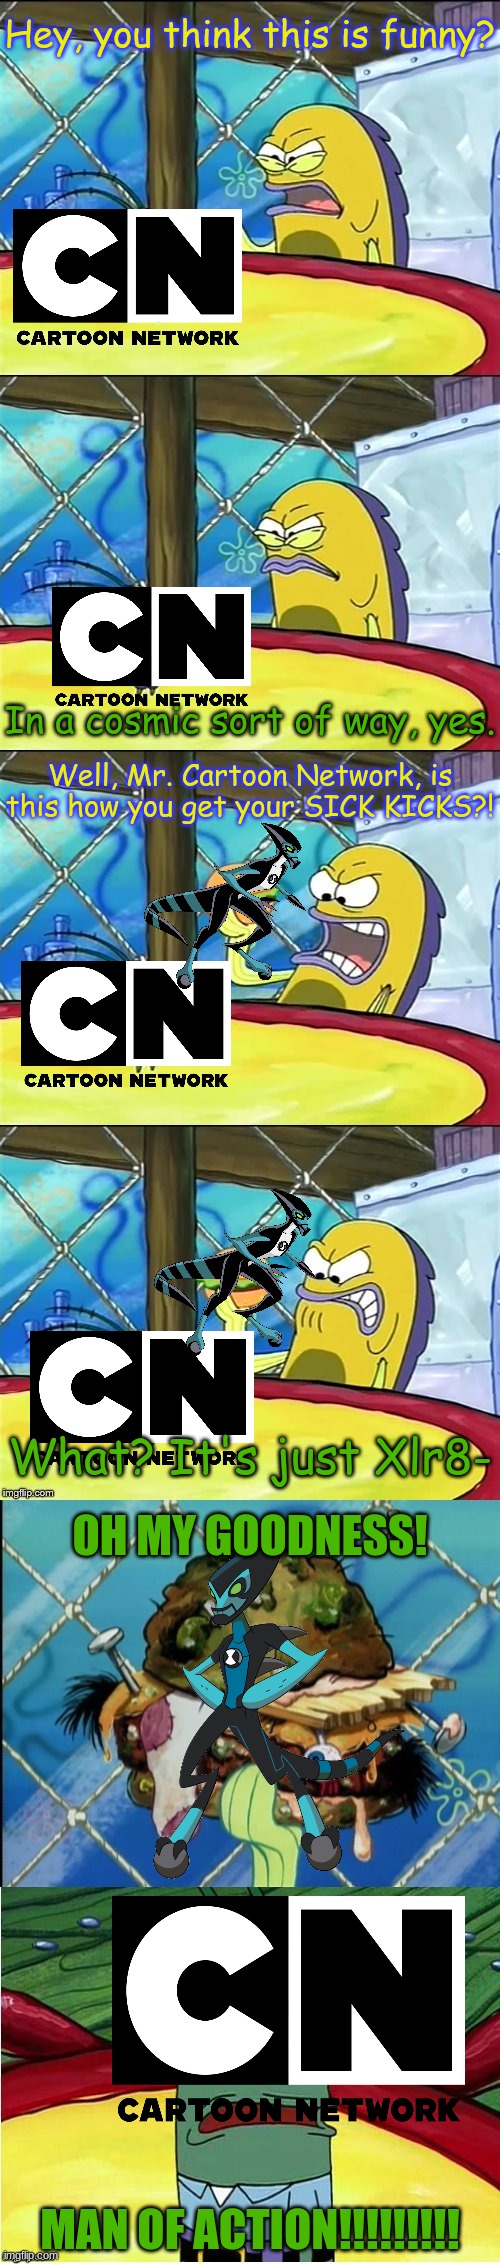 Oh my goodness! | Hey, you think this is funny? In a cosmic sort of way, yes. Well, Mr. Cartoon Network, is this how you get your SICK KICKS?! What? It's just Xlr8-; OH MY GOODNESS! MAN OF ACTION!!!!!!!!! | image tagged in oh my goodness | made w/ Imgflip meme maker